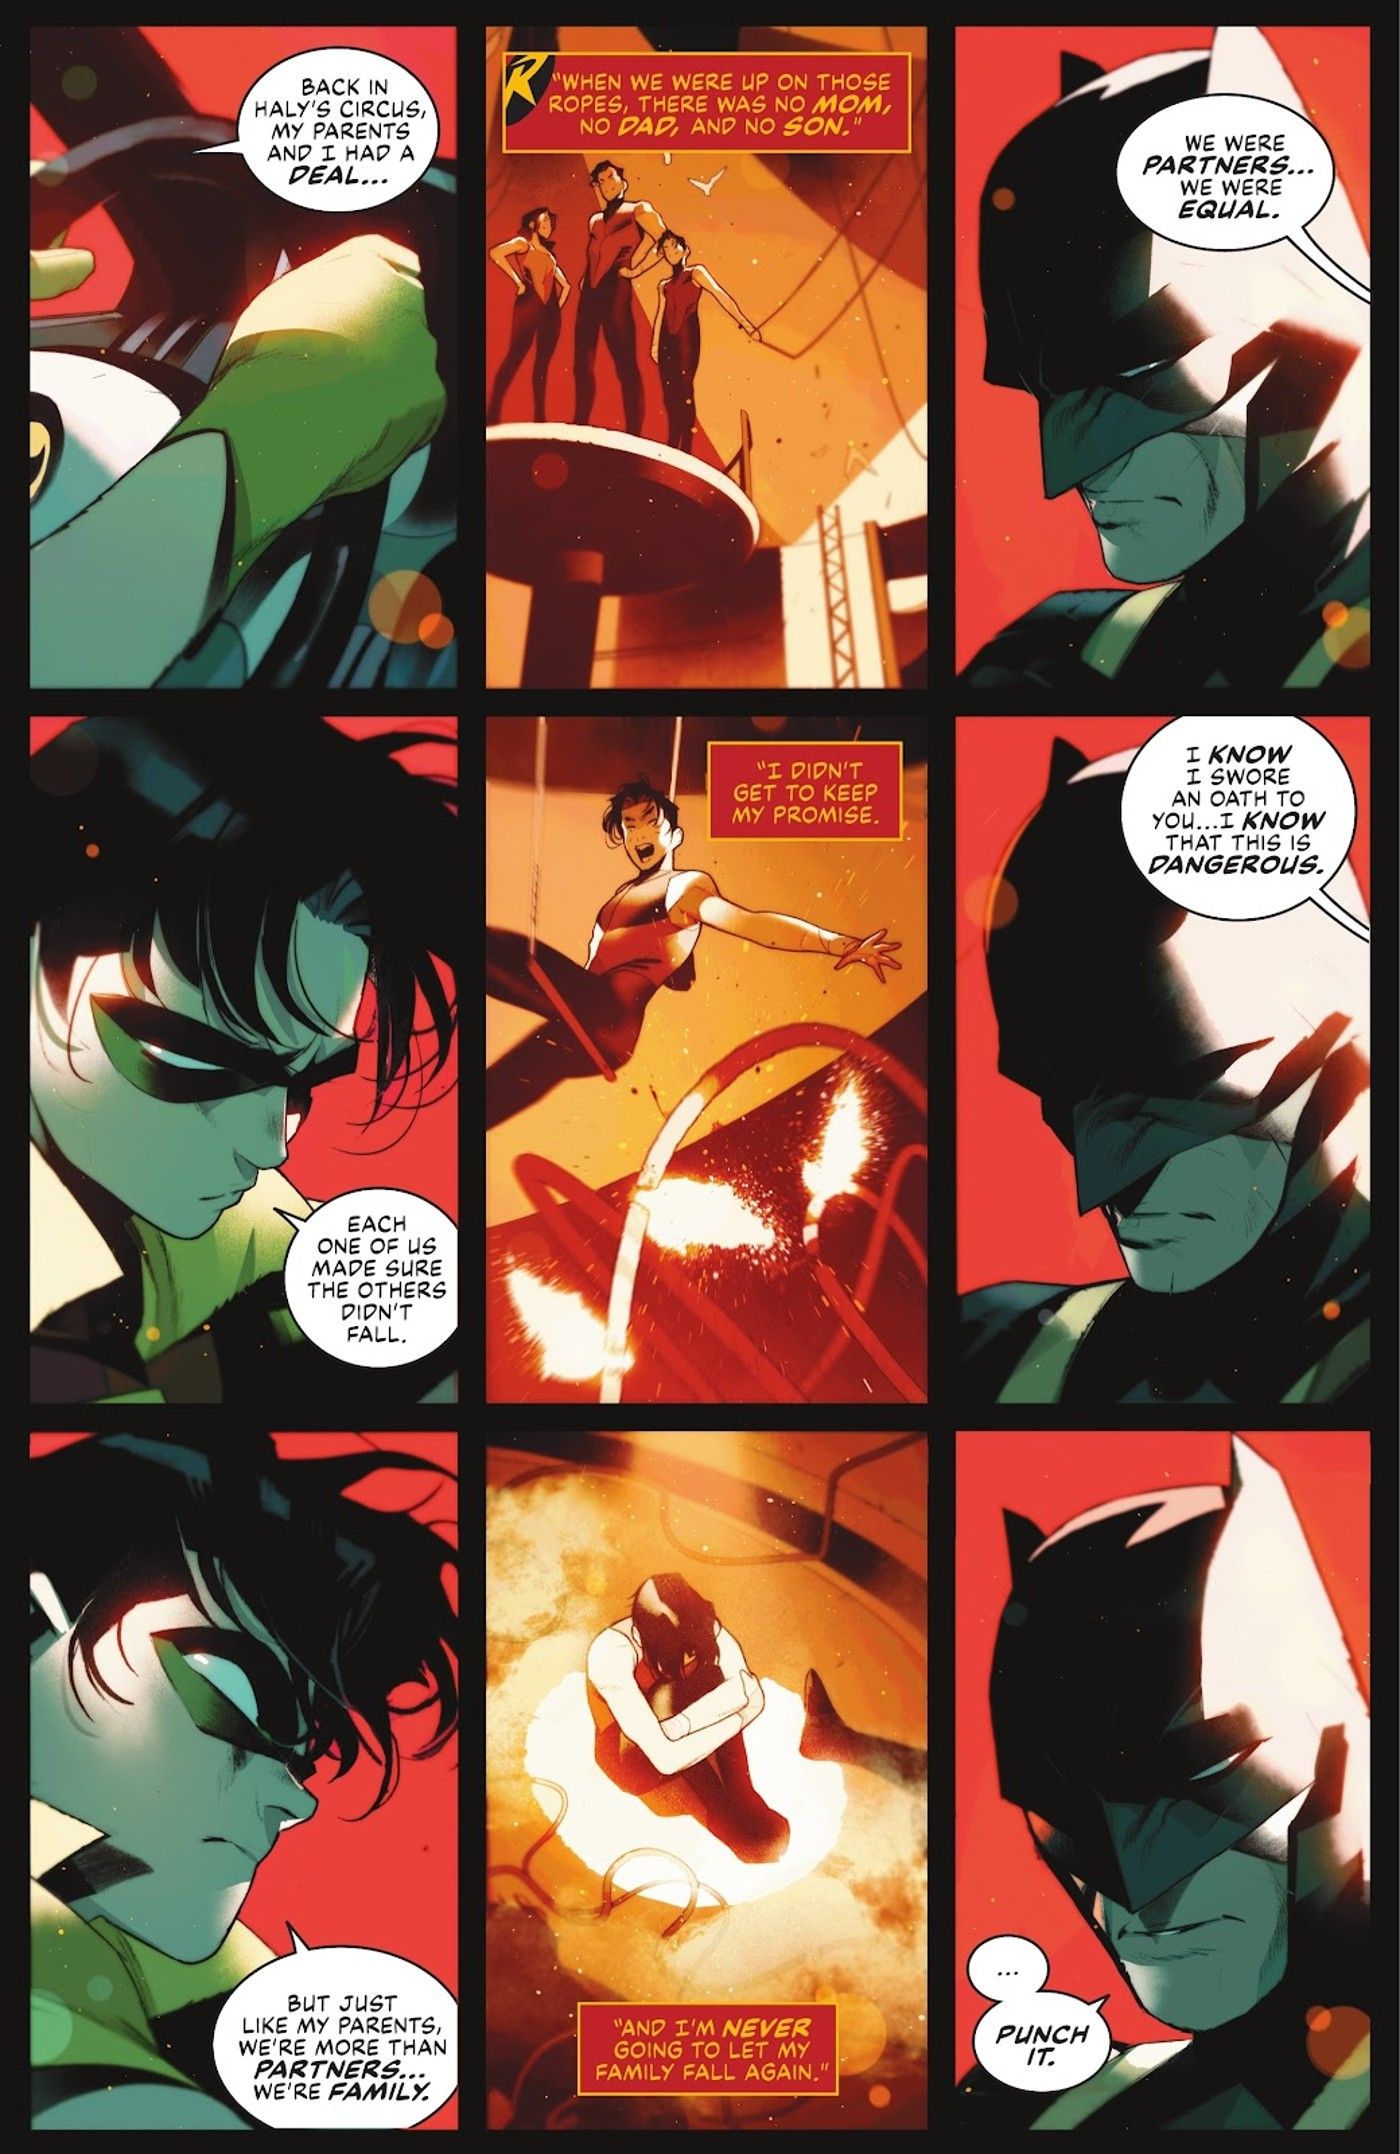 Robin Tells Batman About His Parents in a Nine Panel Grid